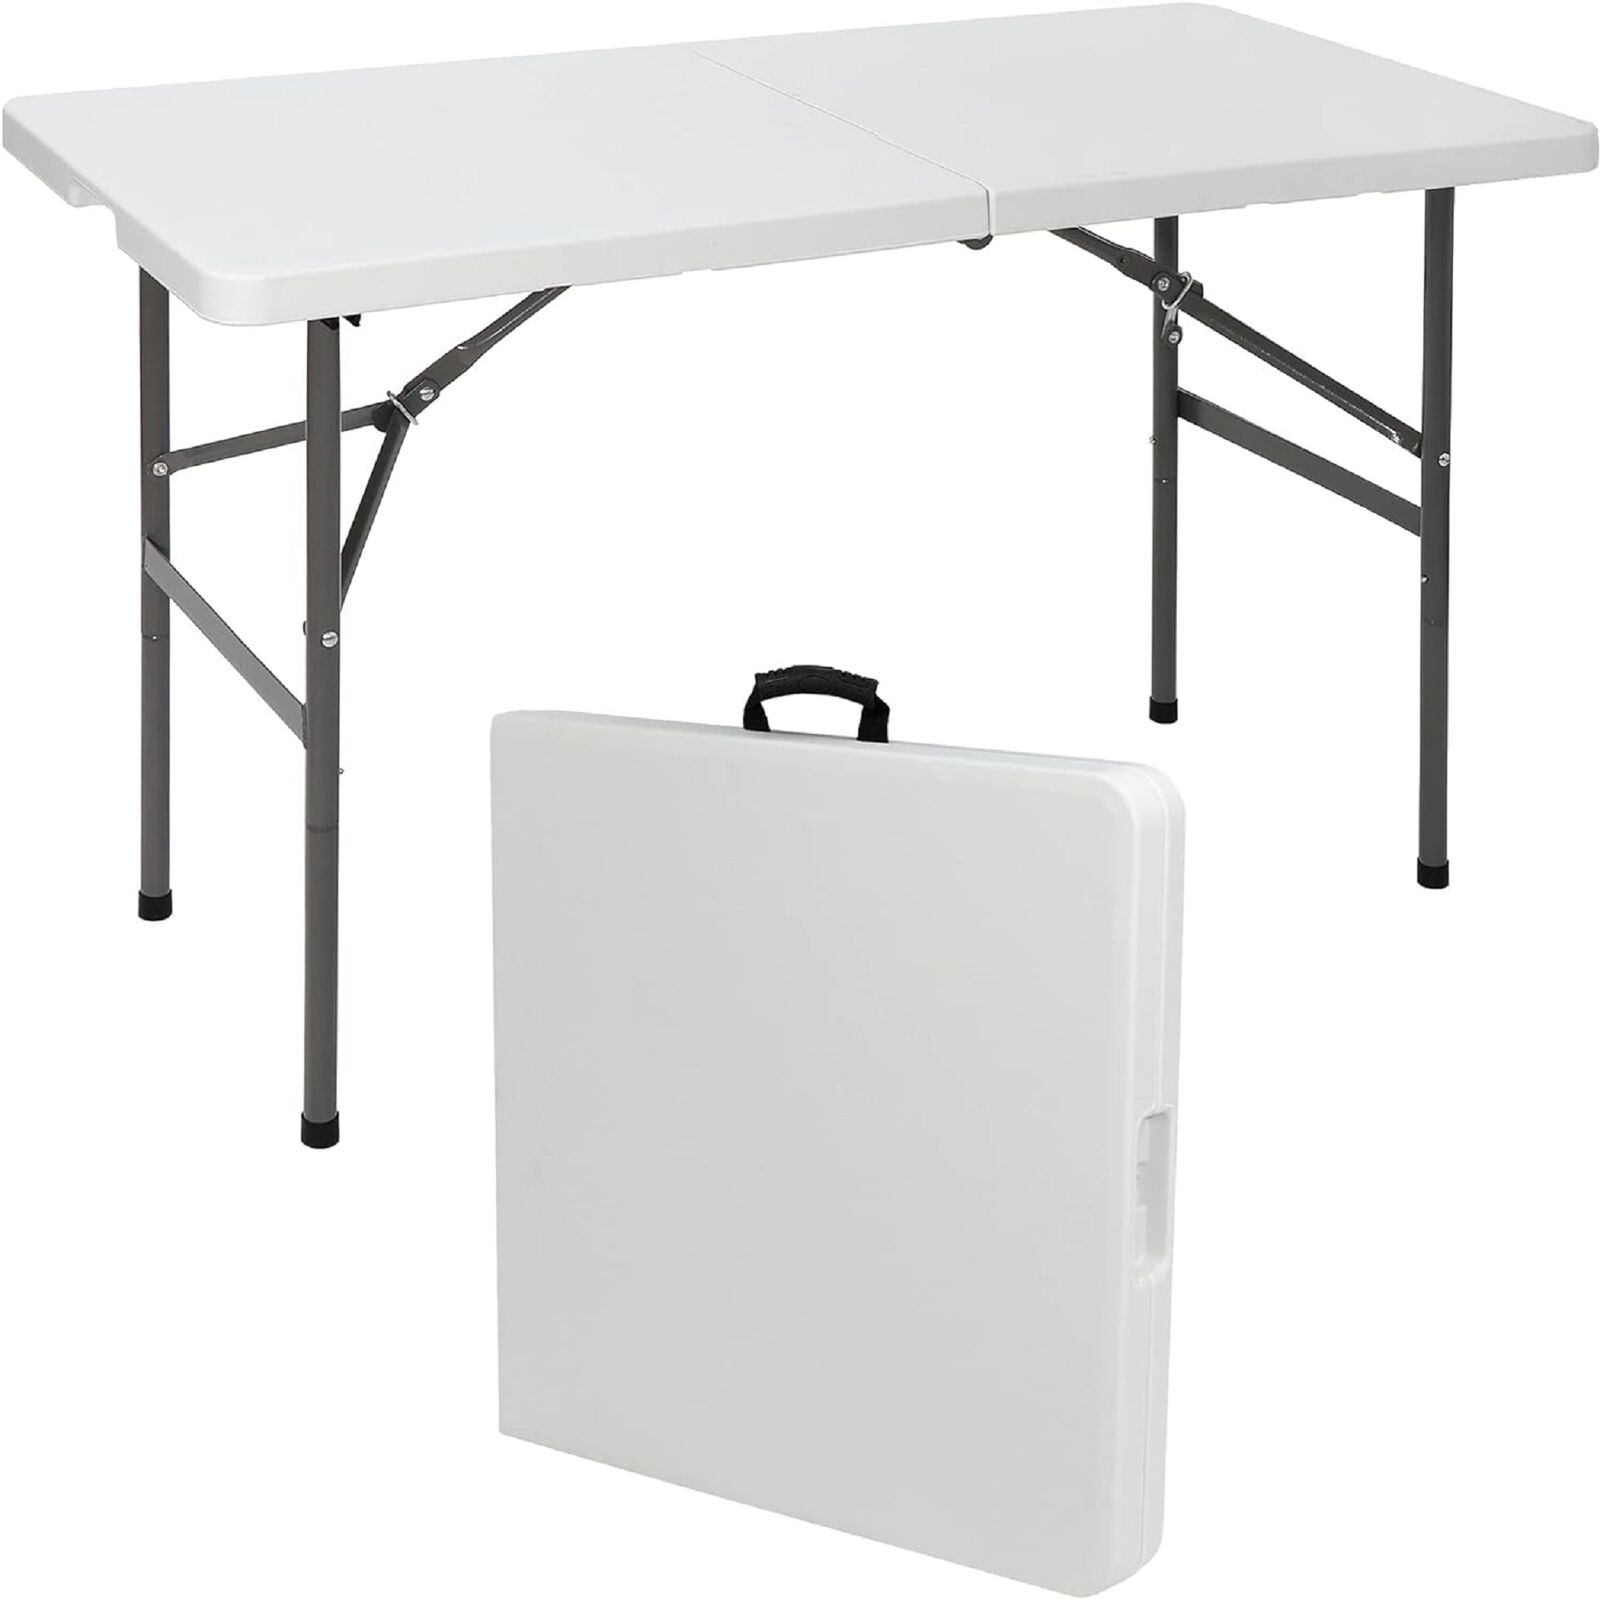 4 FT Folding Table Plastic Portable Tables for Dining Parties Card White/Black